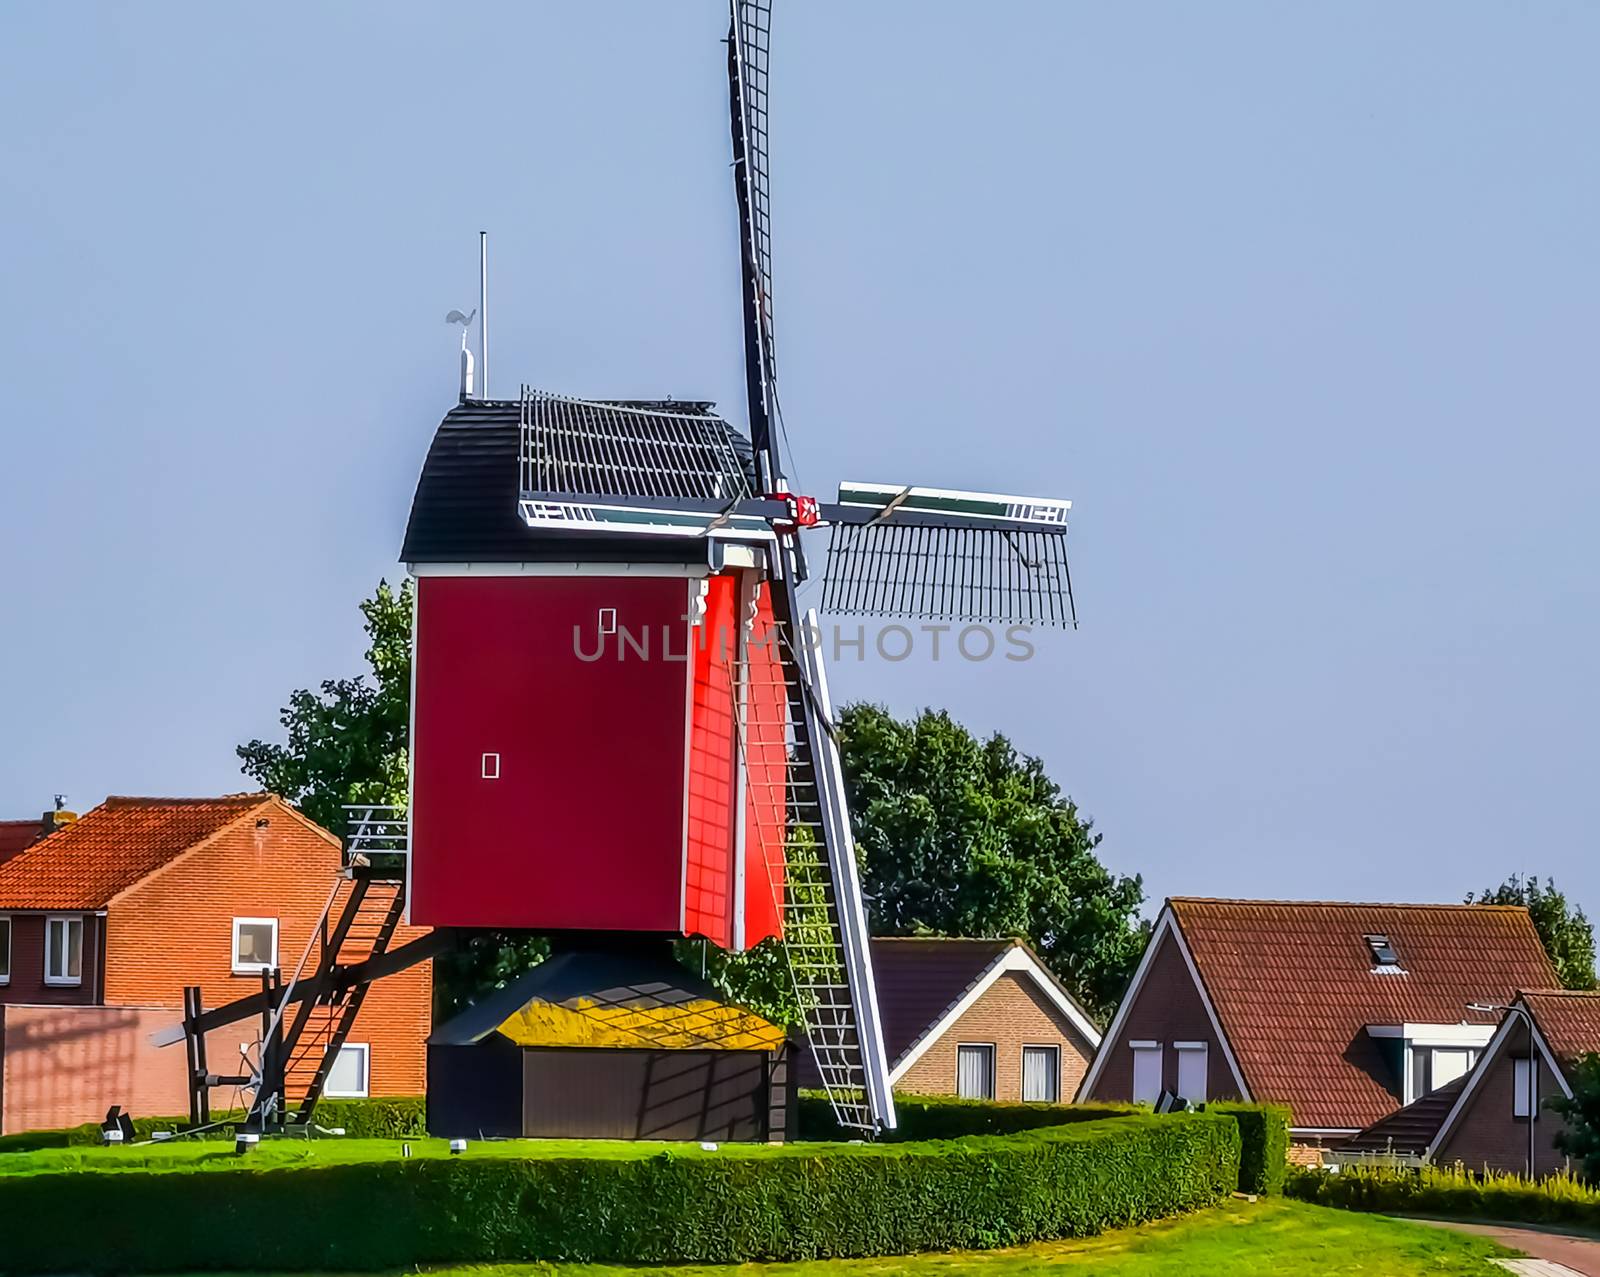 the windmill of sint annaland with the village in the background, touristic town in zeeland, The Netherlands by charlottebleijenberg